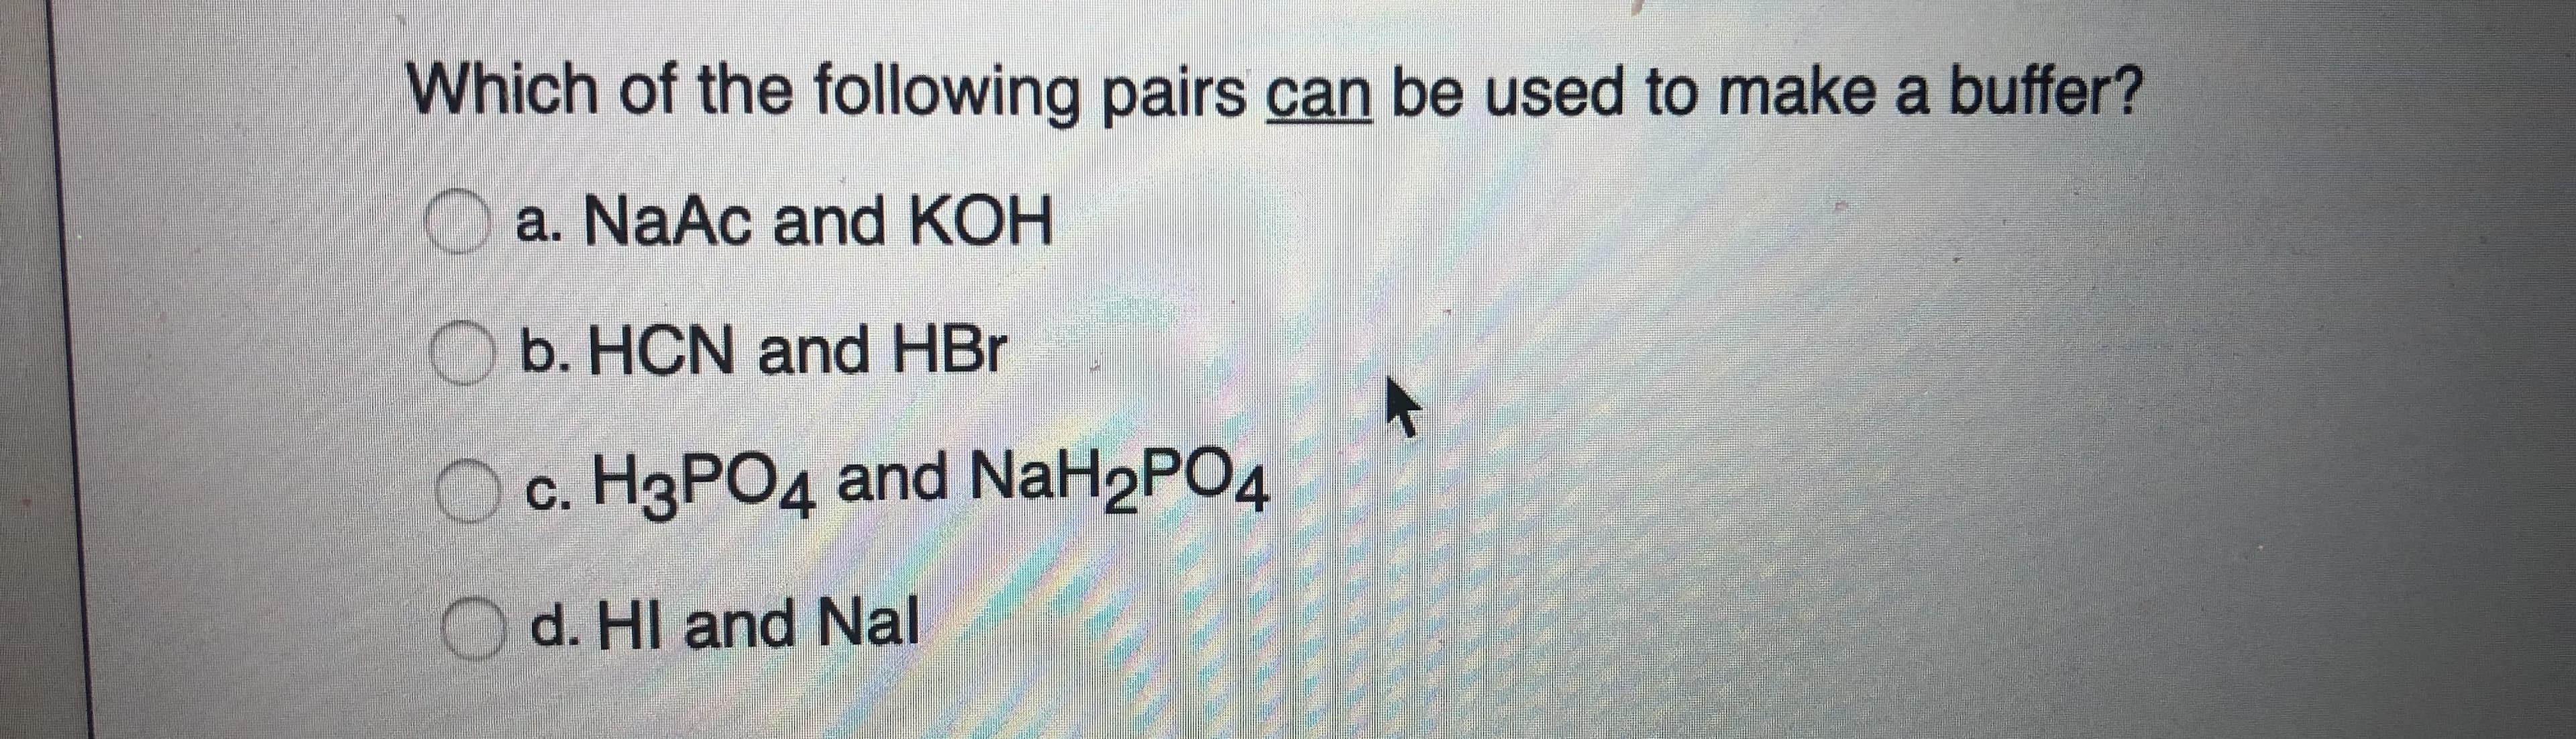 Which of the following pairs can be used to make a buffer?
Oa. NaAc and KOH
b. HCN and HBr
c. H3PO4 and NaH2PO4
d. HI and Nal
